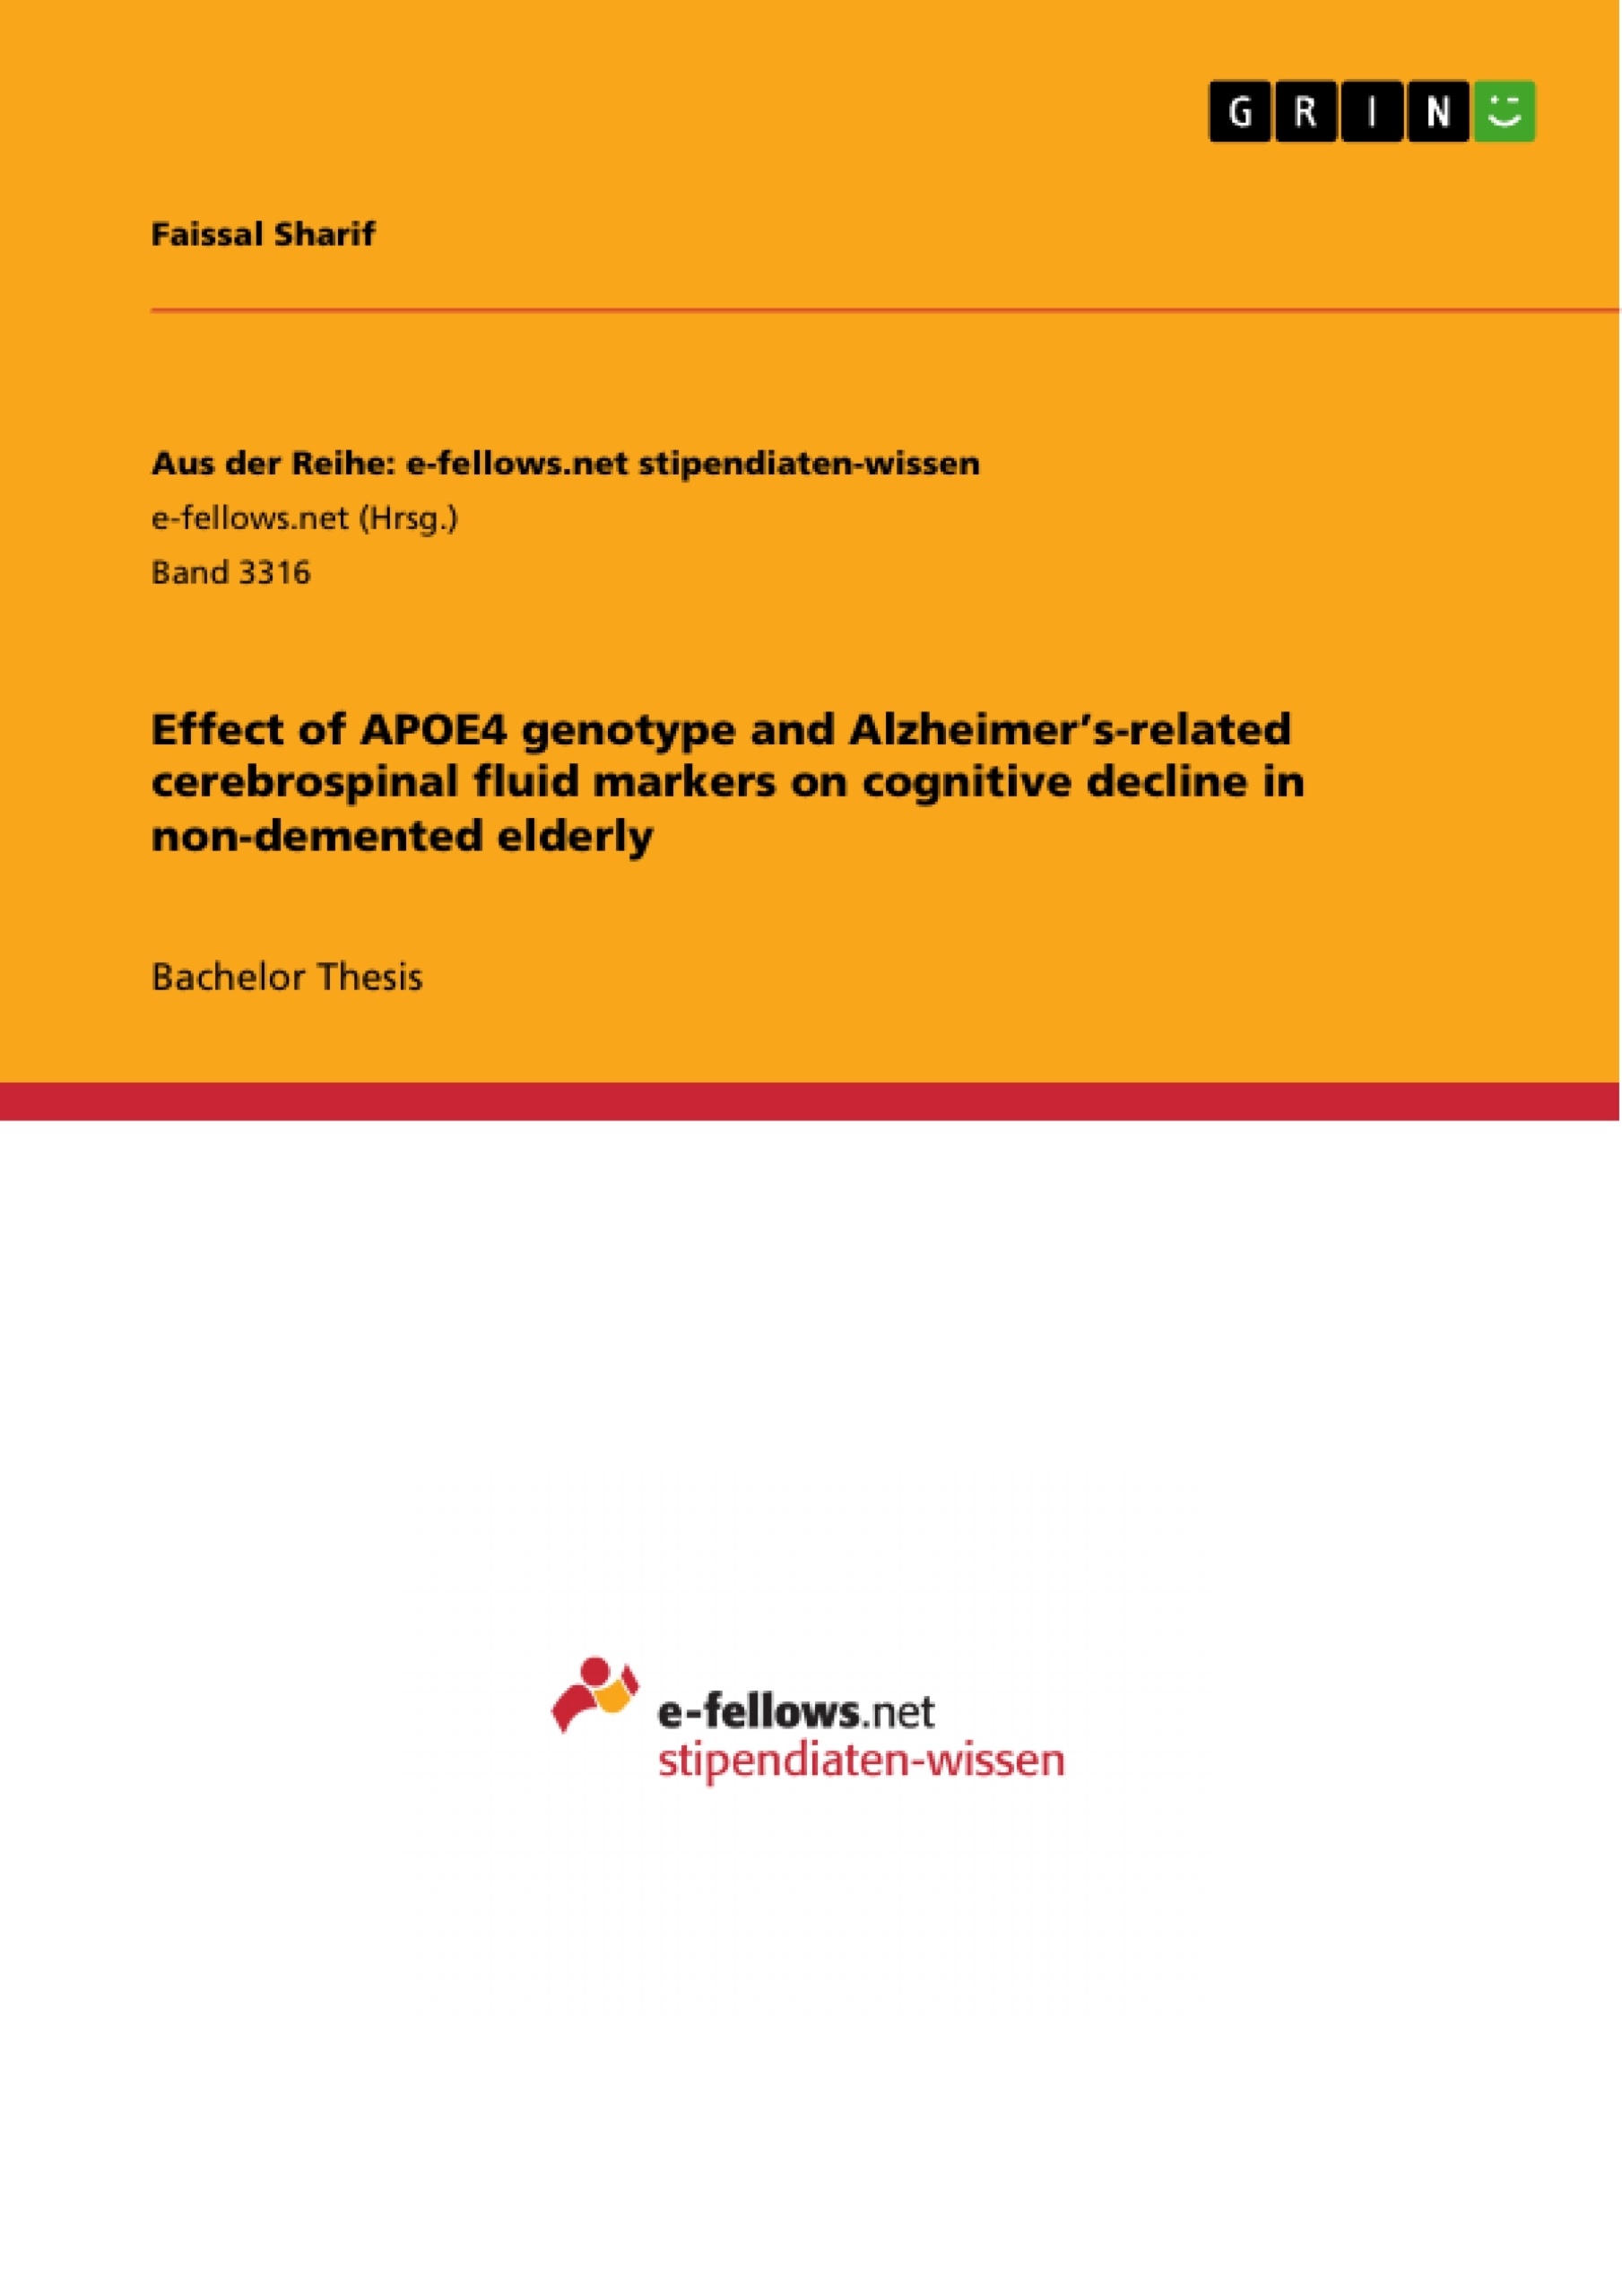 Title: Effect of APOE4 genotype and Alzheimer’s-related cerebrospinal fluid markers on cognitive decline in non-demented elderly